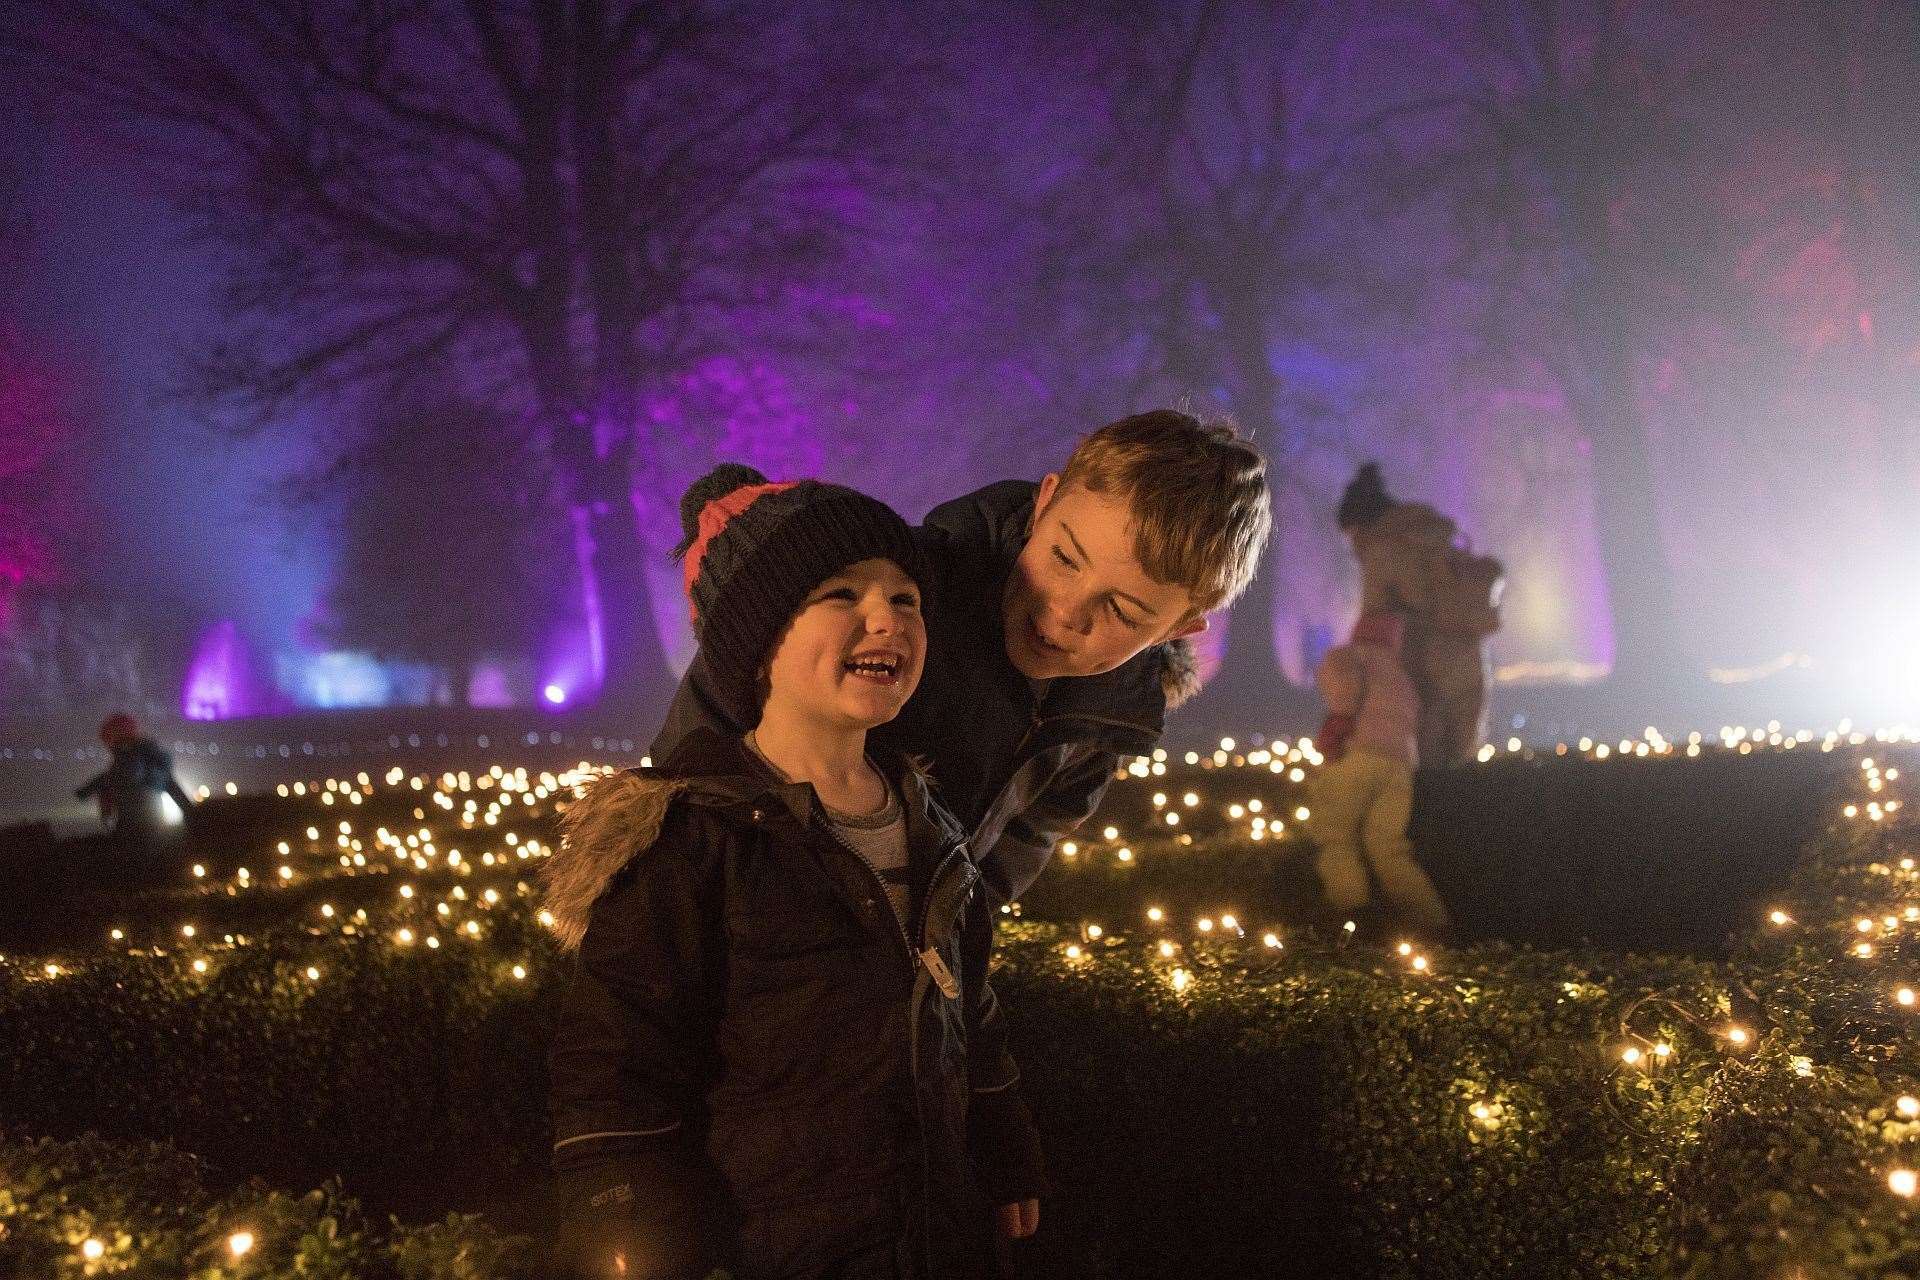 Walmer Castle and Gardens has announced plans for an after-dark experience